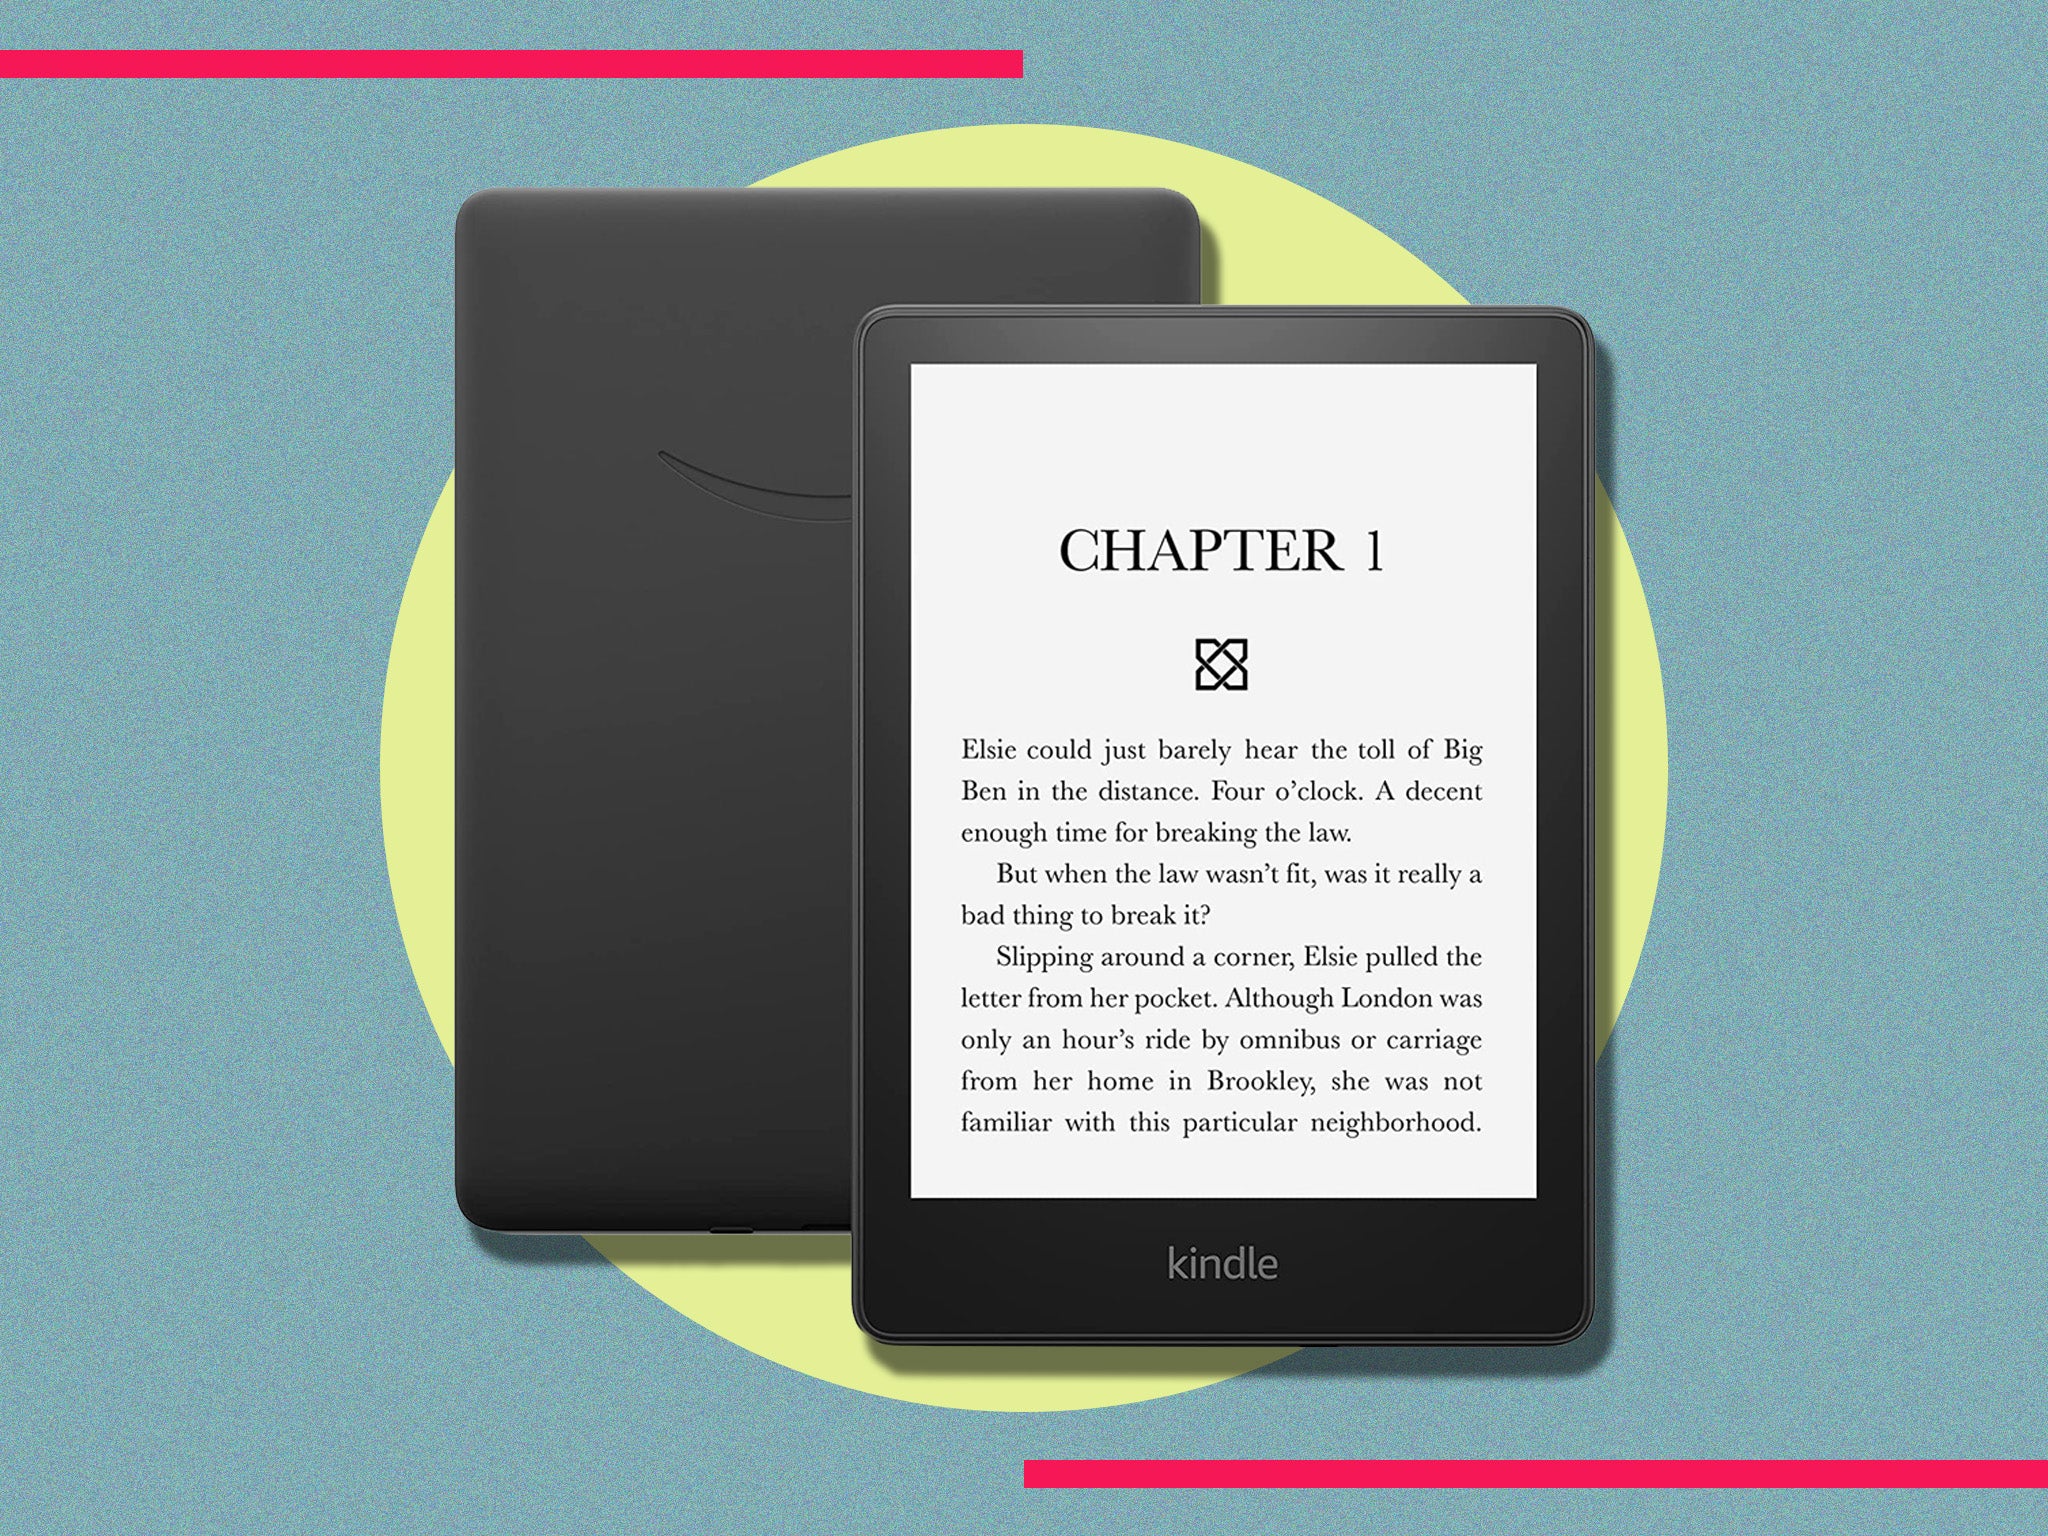 Amazon Kindle paperwhite (2021) review: Bigger screen, better 